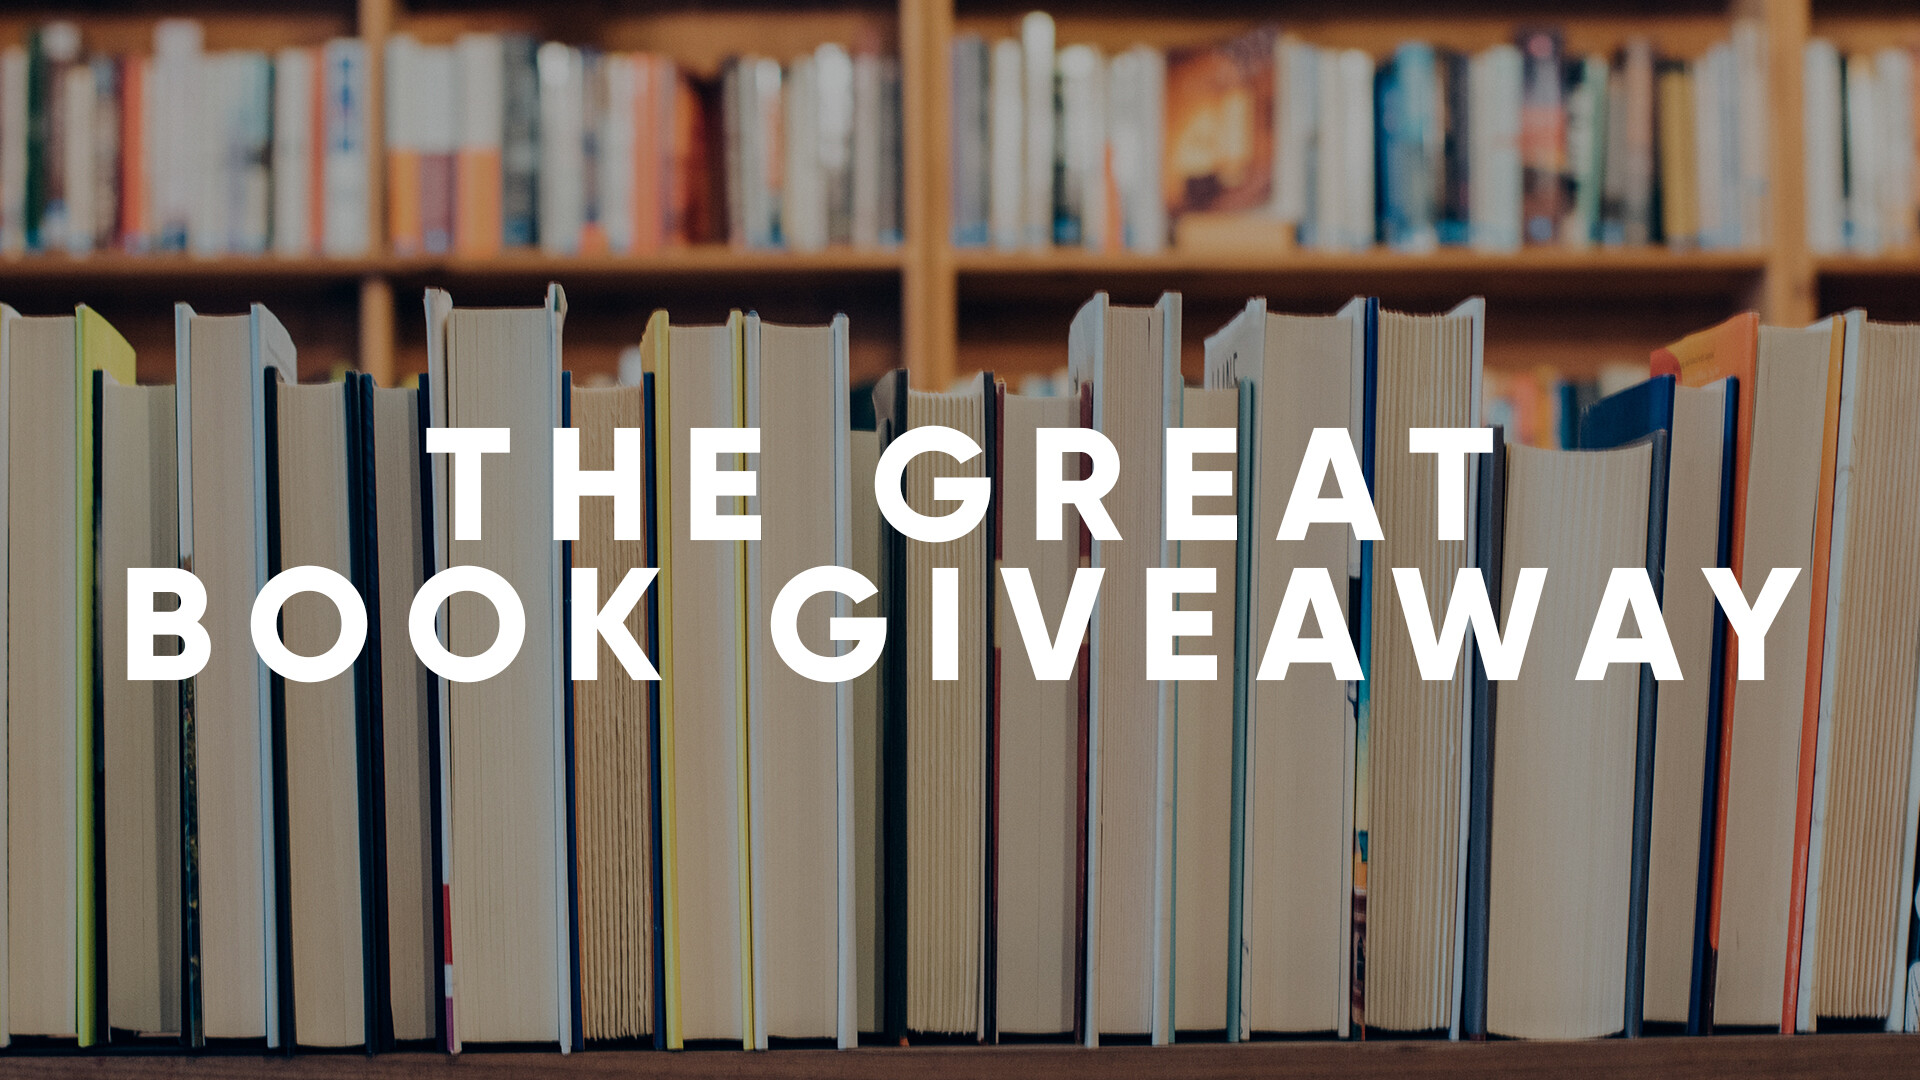 The Great Book Giveaway